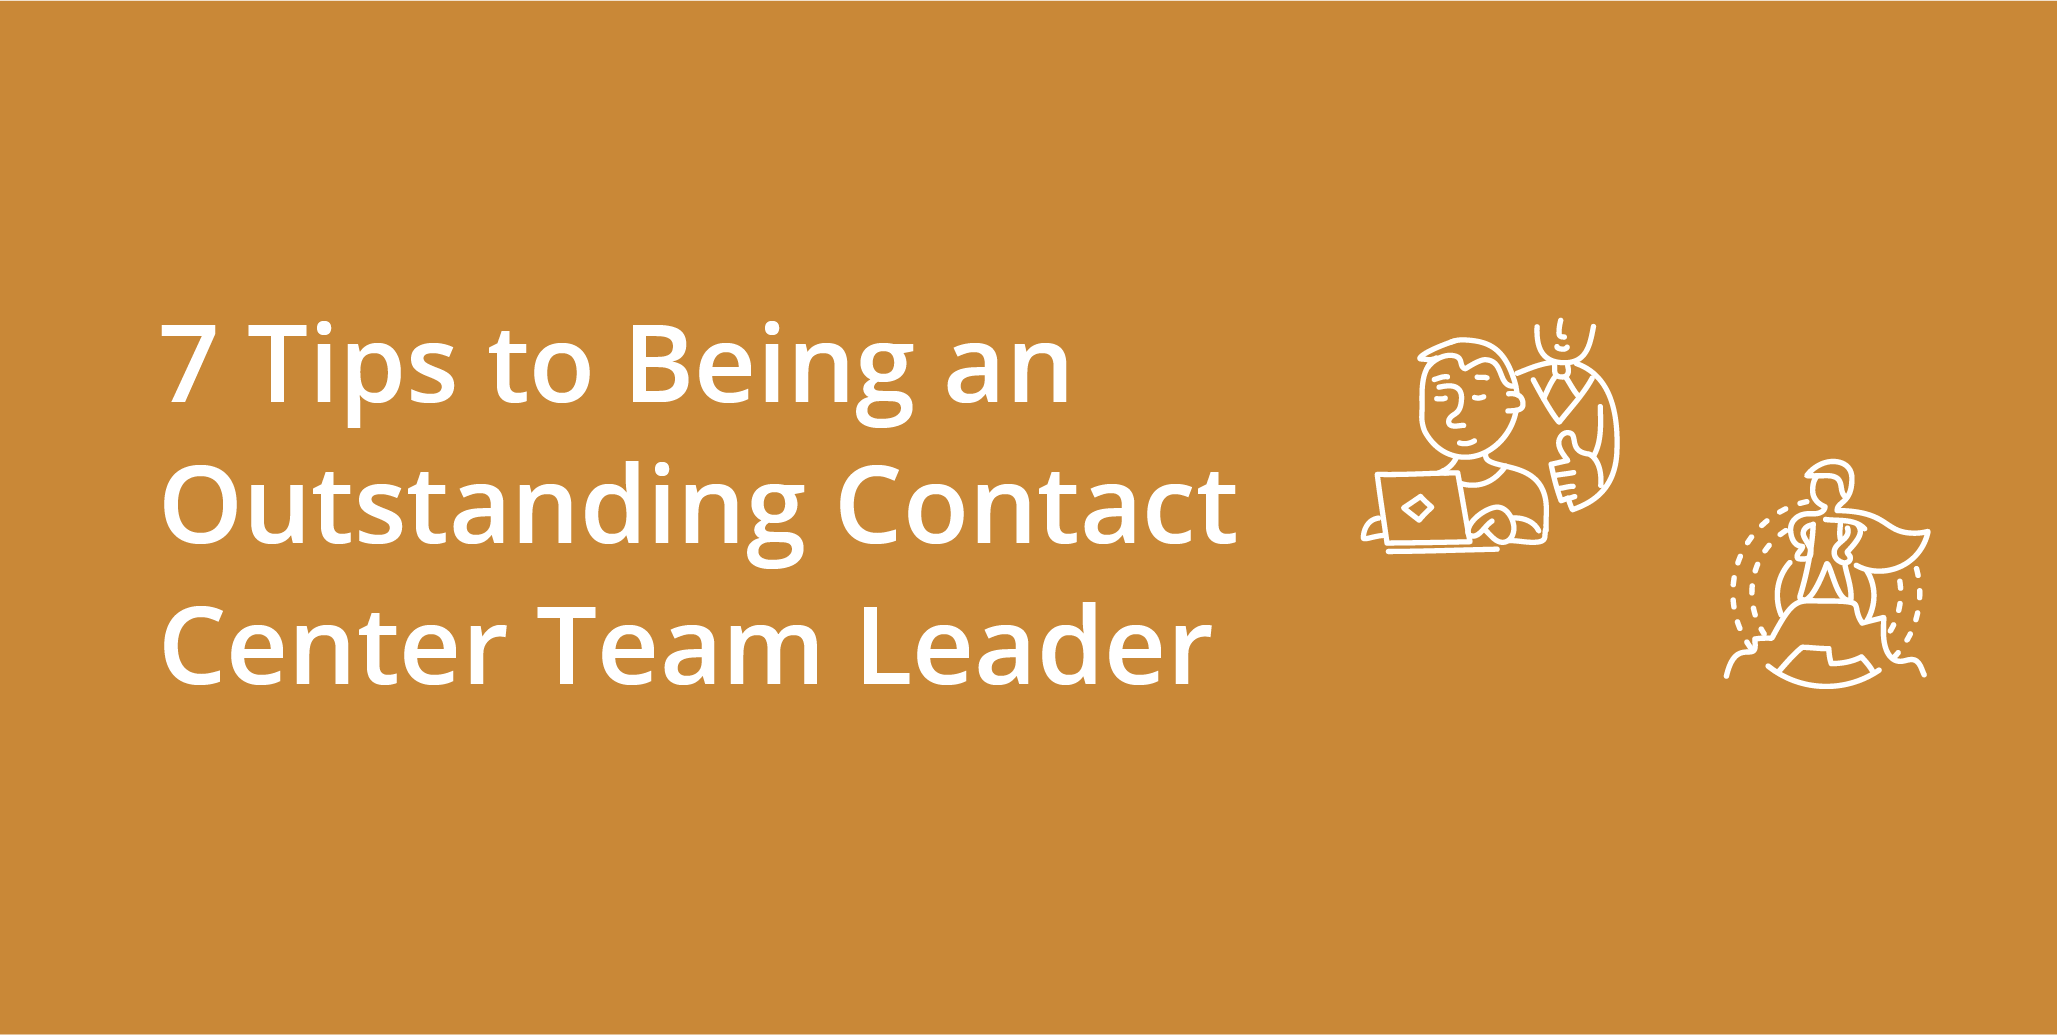 7 Tips to Being an Outstanding Contact Center Team Leader